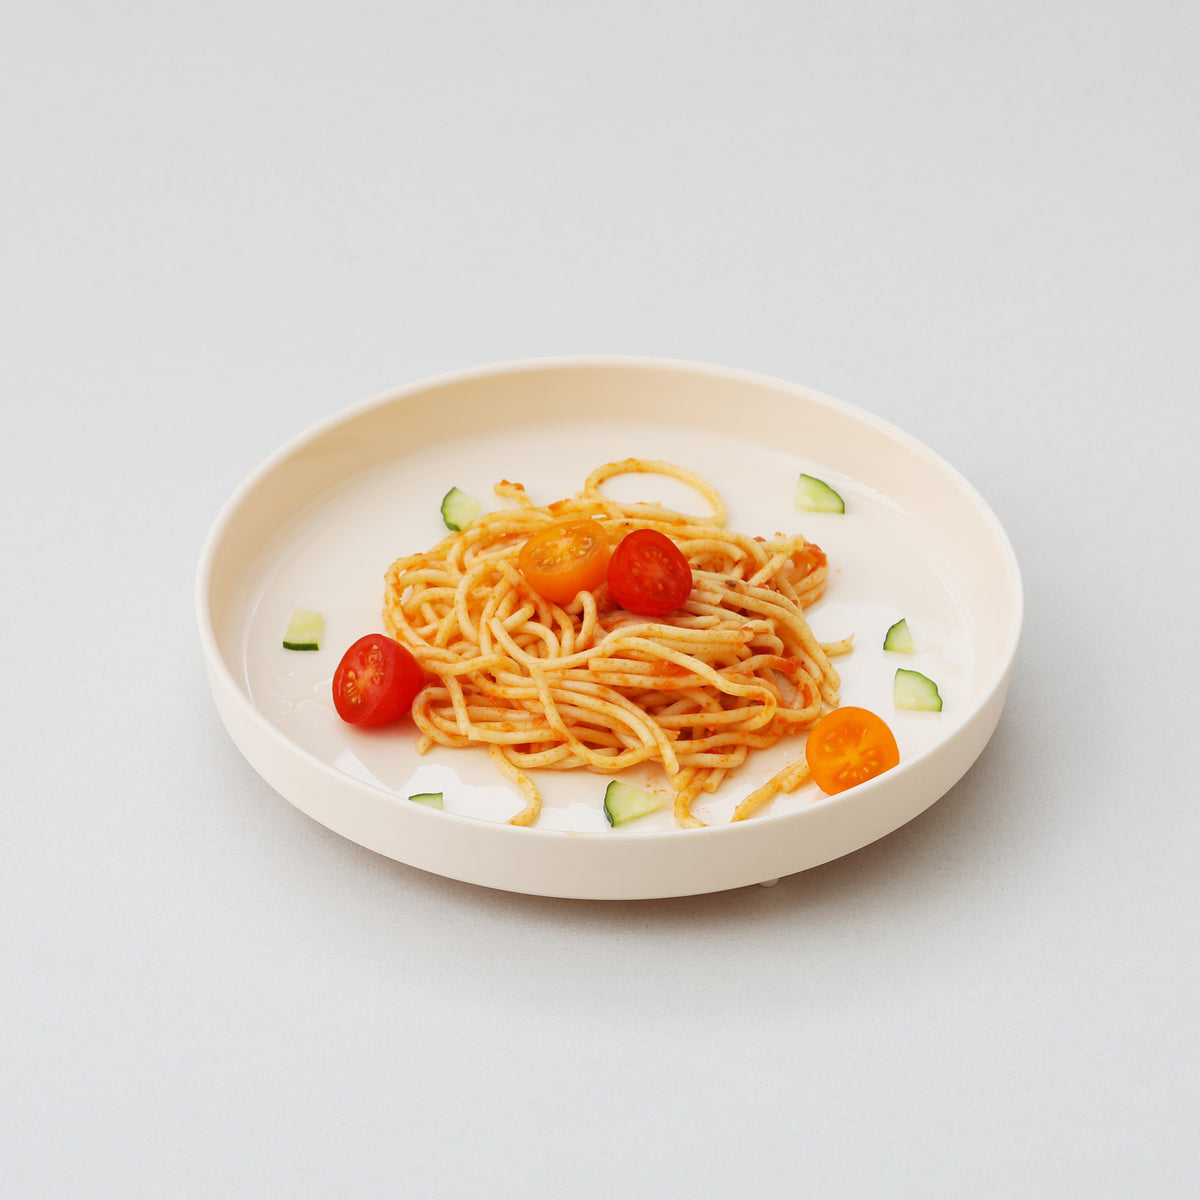 miniware-healthy-meal-set-pla-smart-divider-suction-plate-in-vanilla-+-silicone-divider-in-peach- (28)